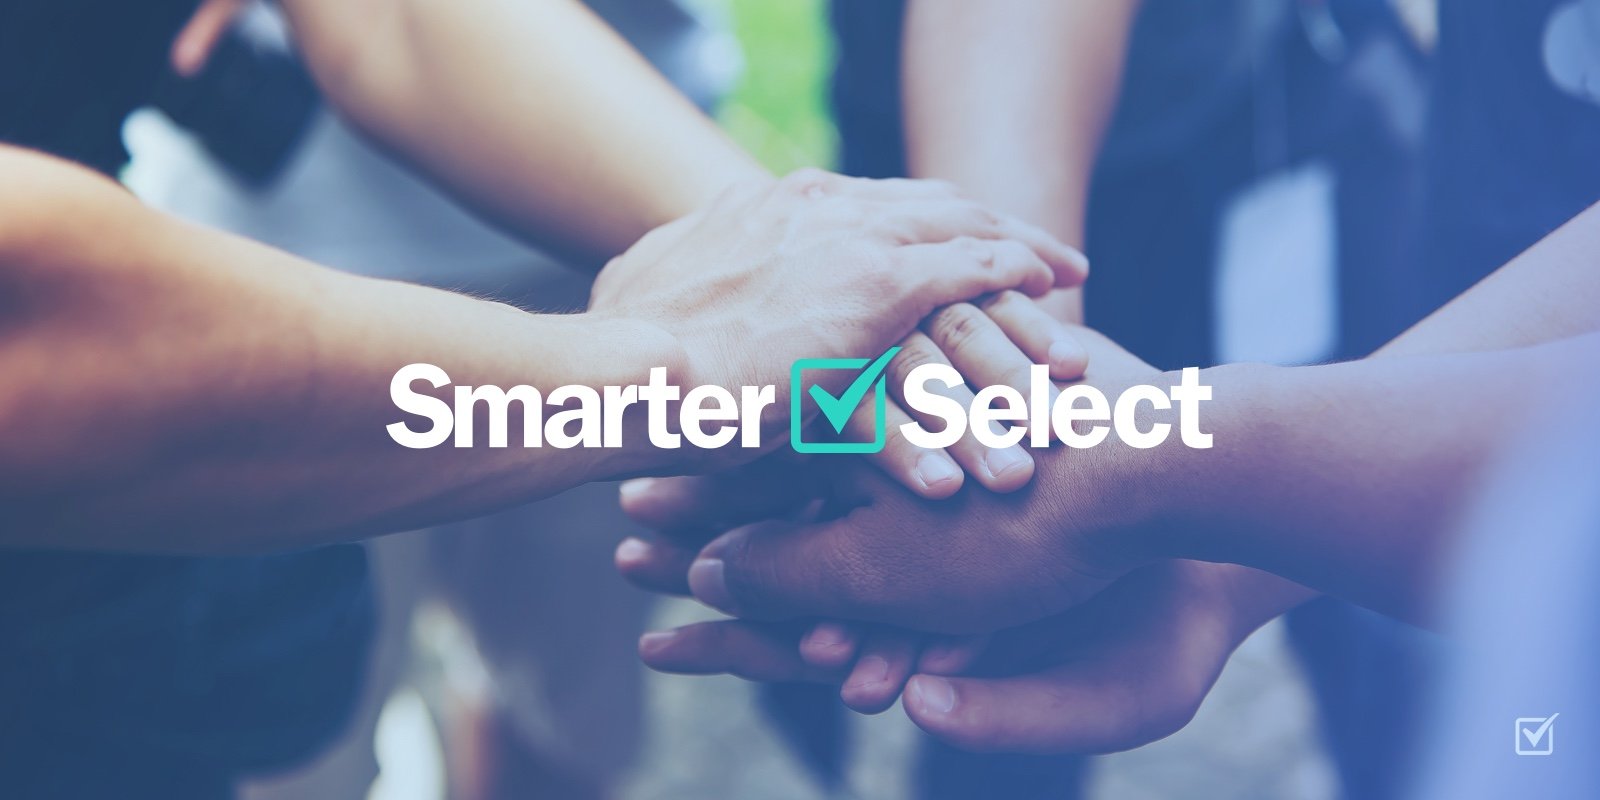 SmarterSelect: Who we are and what we've done